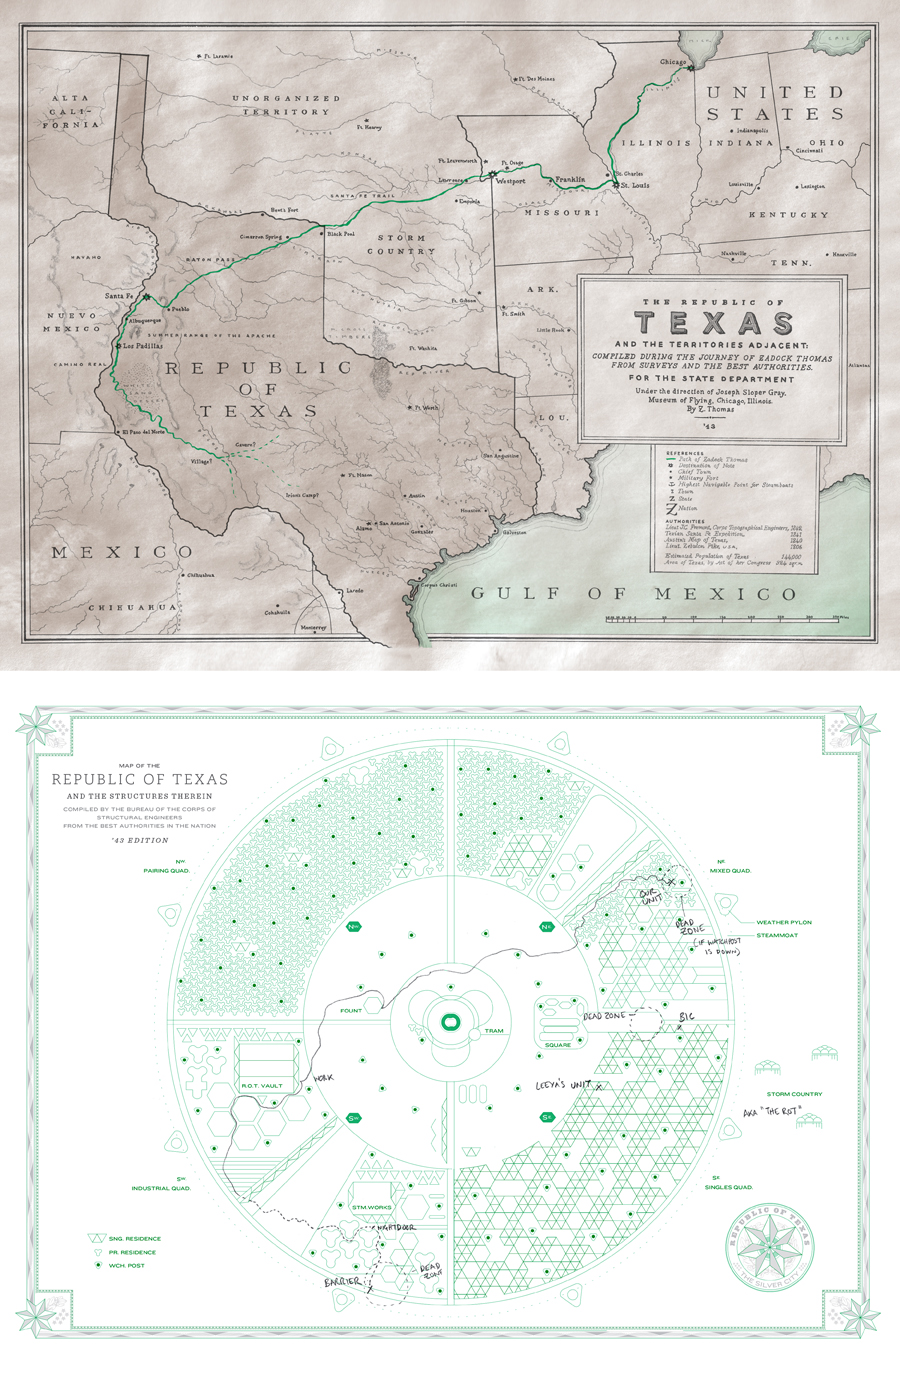 Figure 3. Maps of Texas pertaining to the timescapes of 1843 and 2143 in Zachary Thomas Dodson’s Bats of the Republic: An Illuminated Novel (2015, 16–17; 32–33)